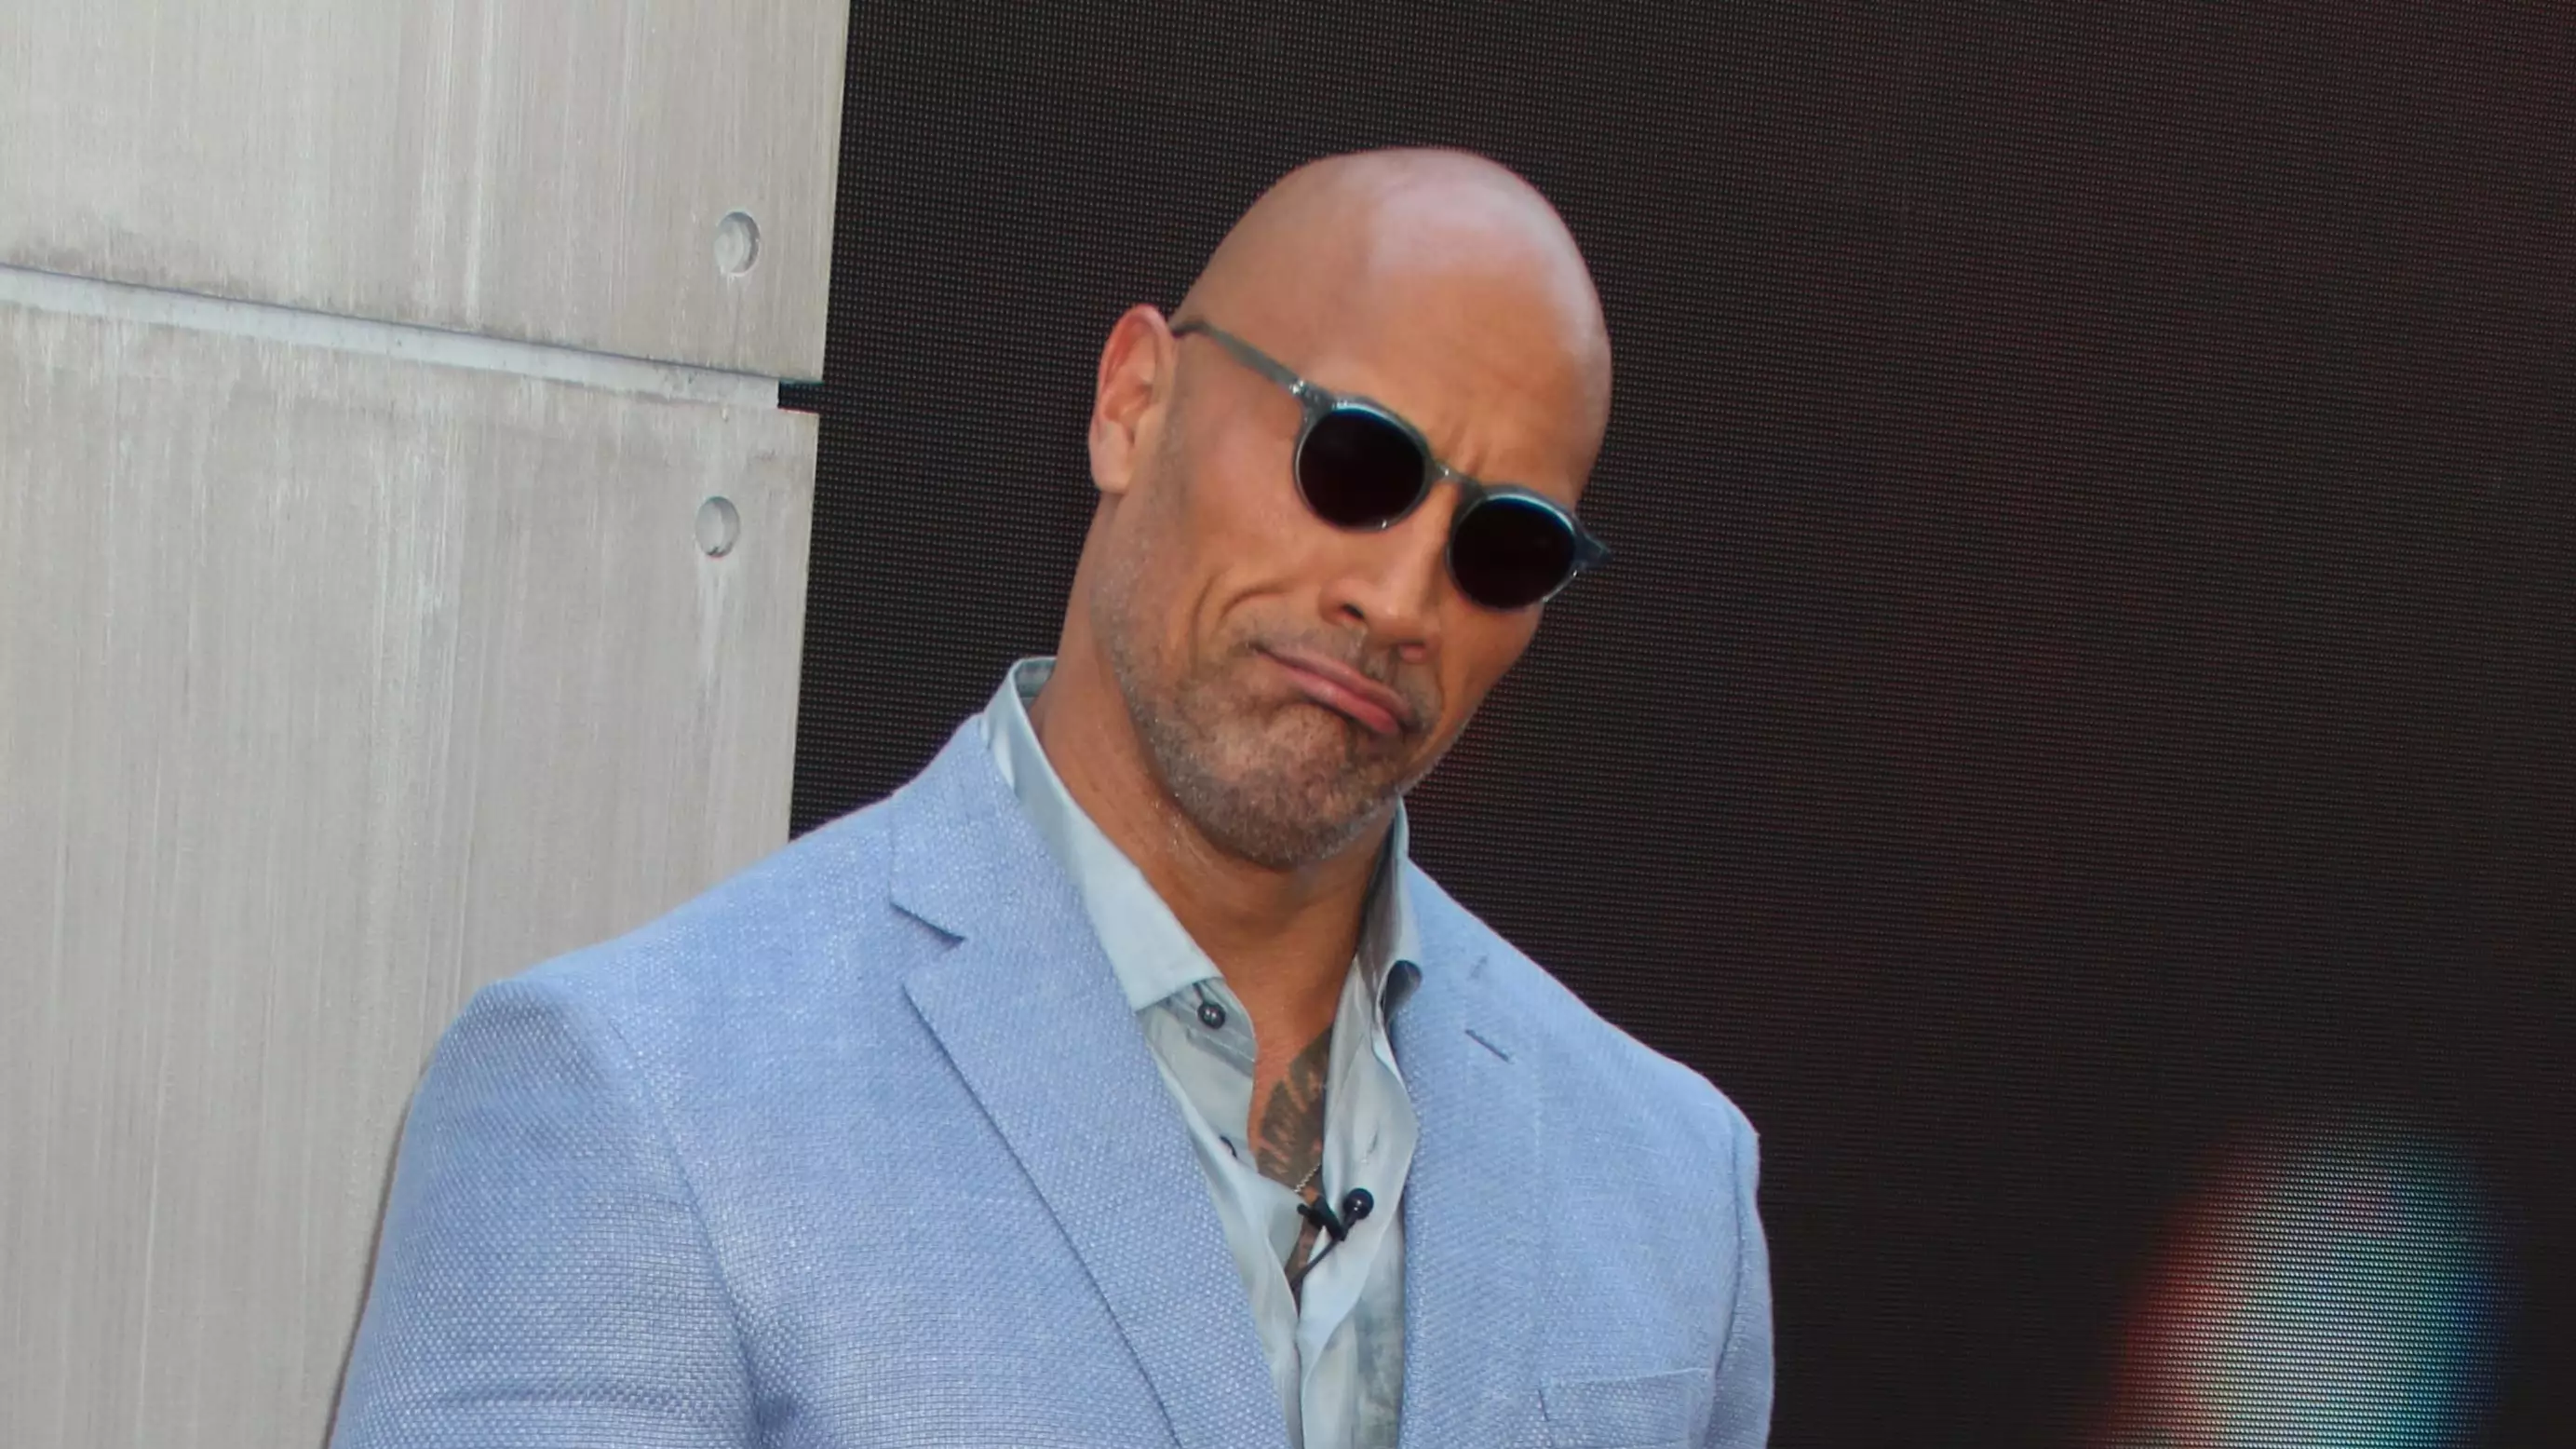 The Rock Sings To His Daughter And She Takes A Big Dump